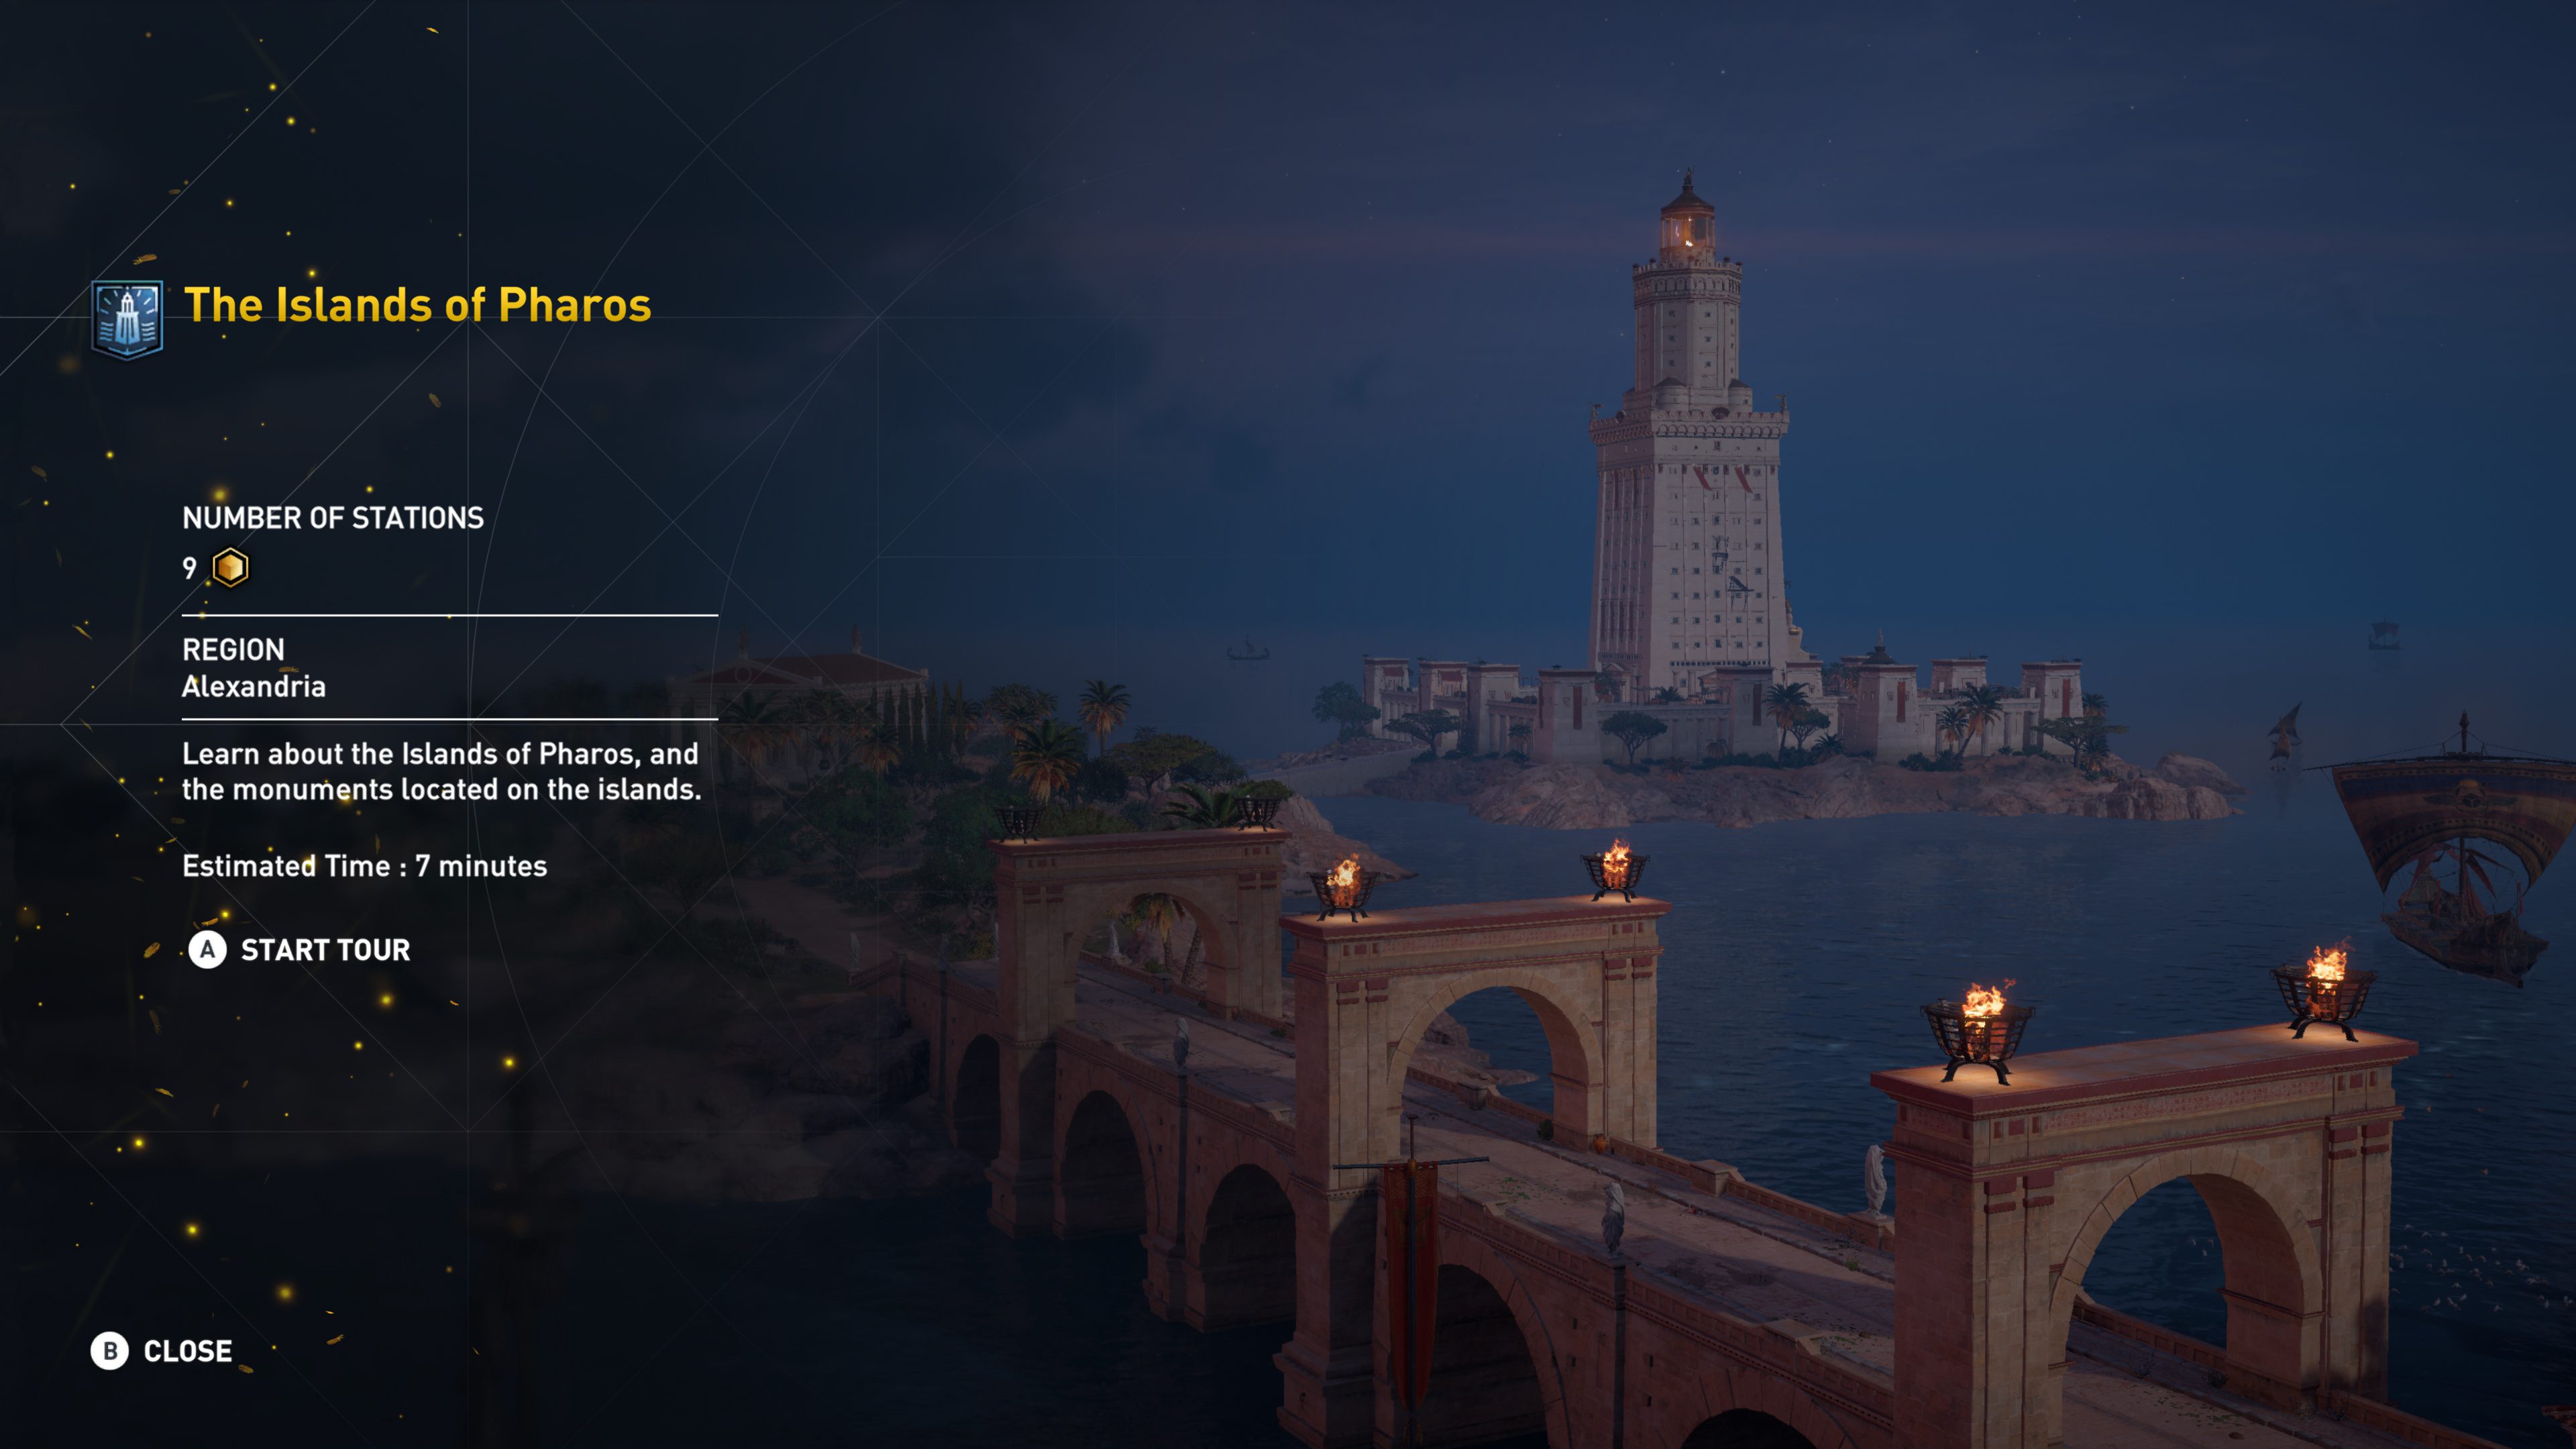 THE DISCOVERY TOUR BY ASSASSIN’S CREED TRANSFORMS ANCIENT EGYPT INTO AN INTERACTIVE MUSEUM